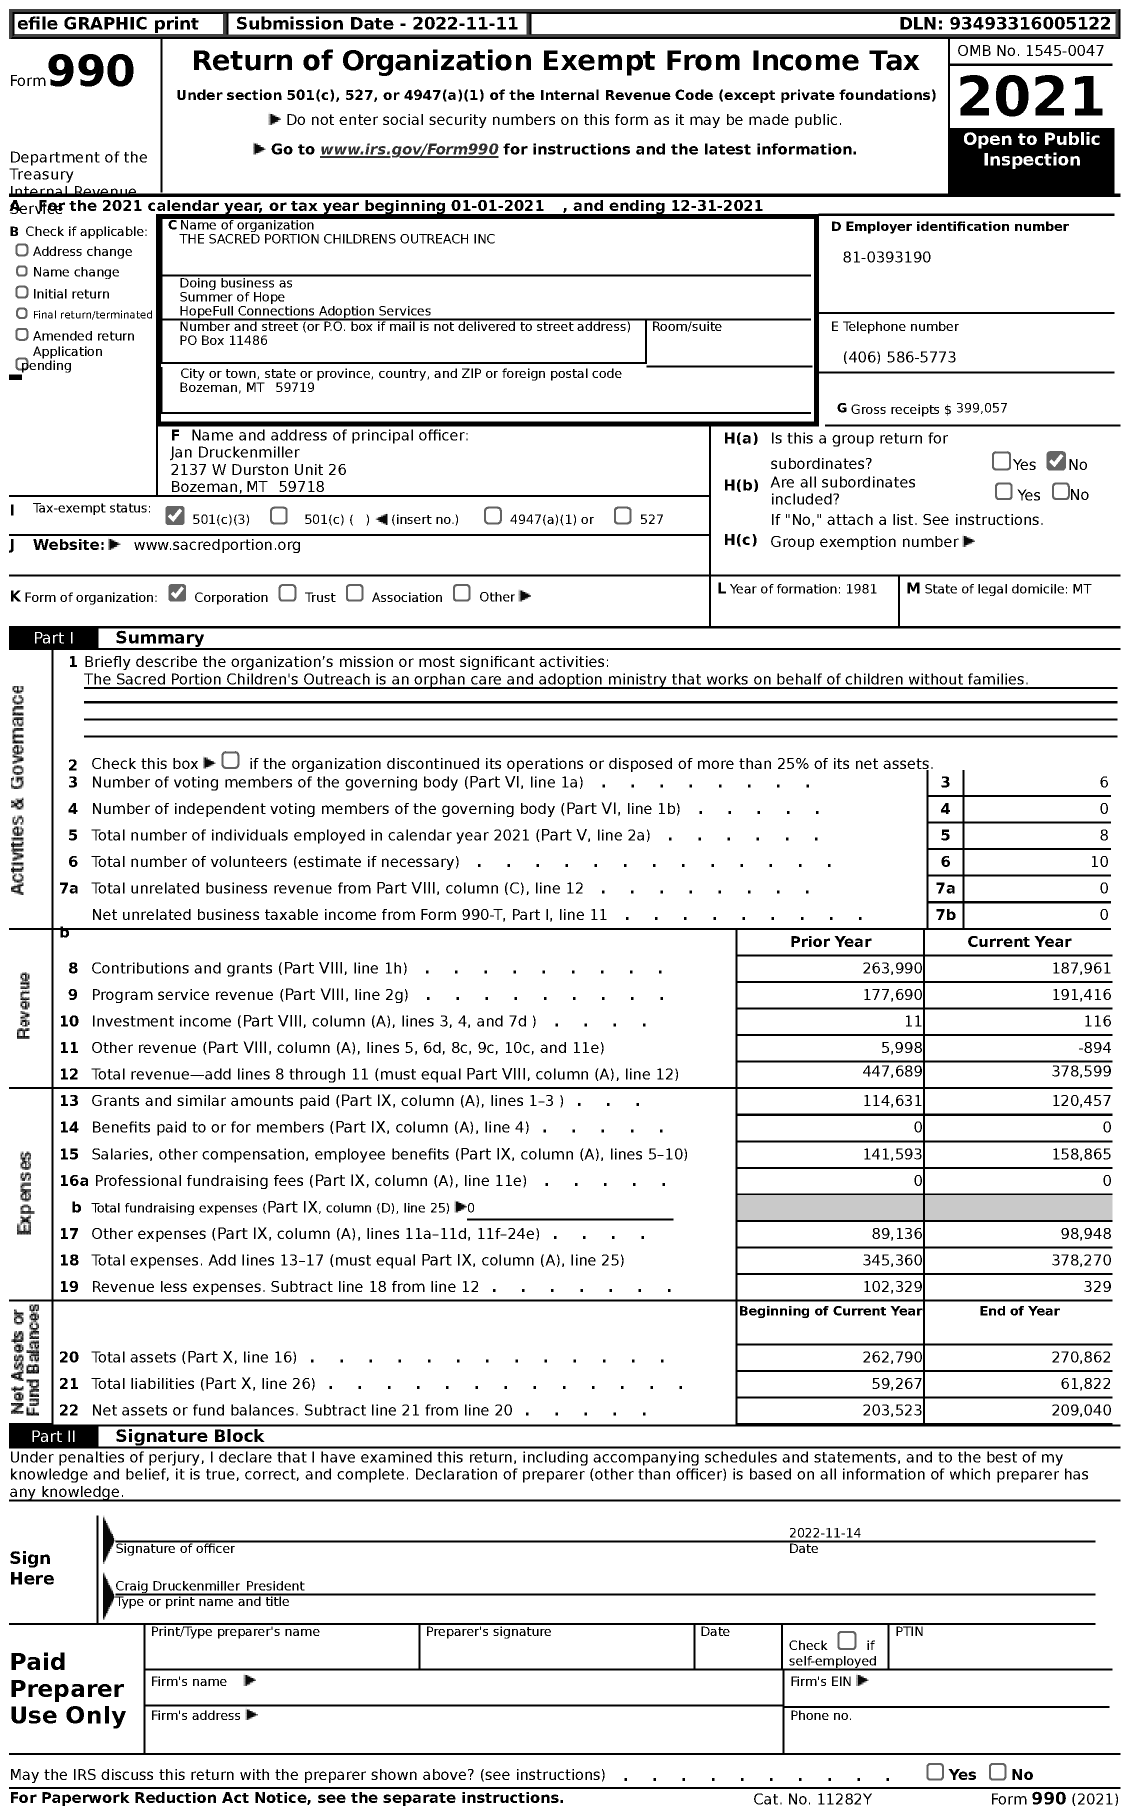 Image of first page of 2021 Form 990 for Summer of Hope HopeFull Connections Adoption Services